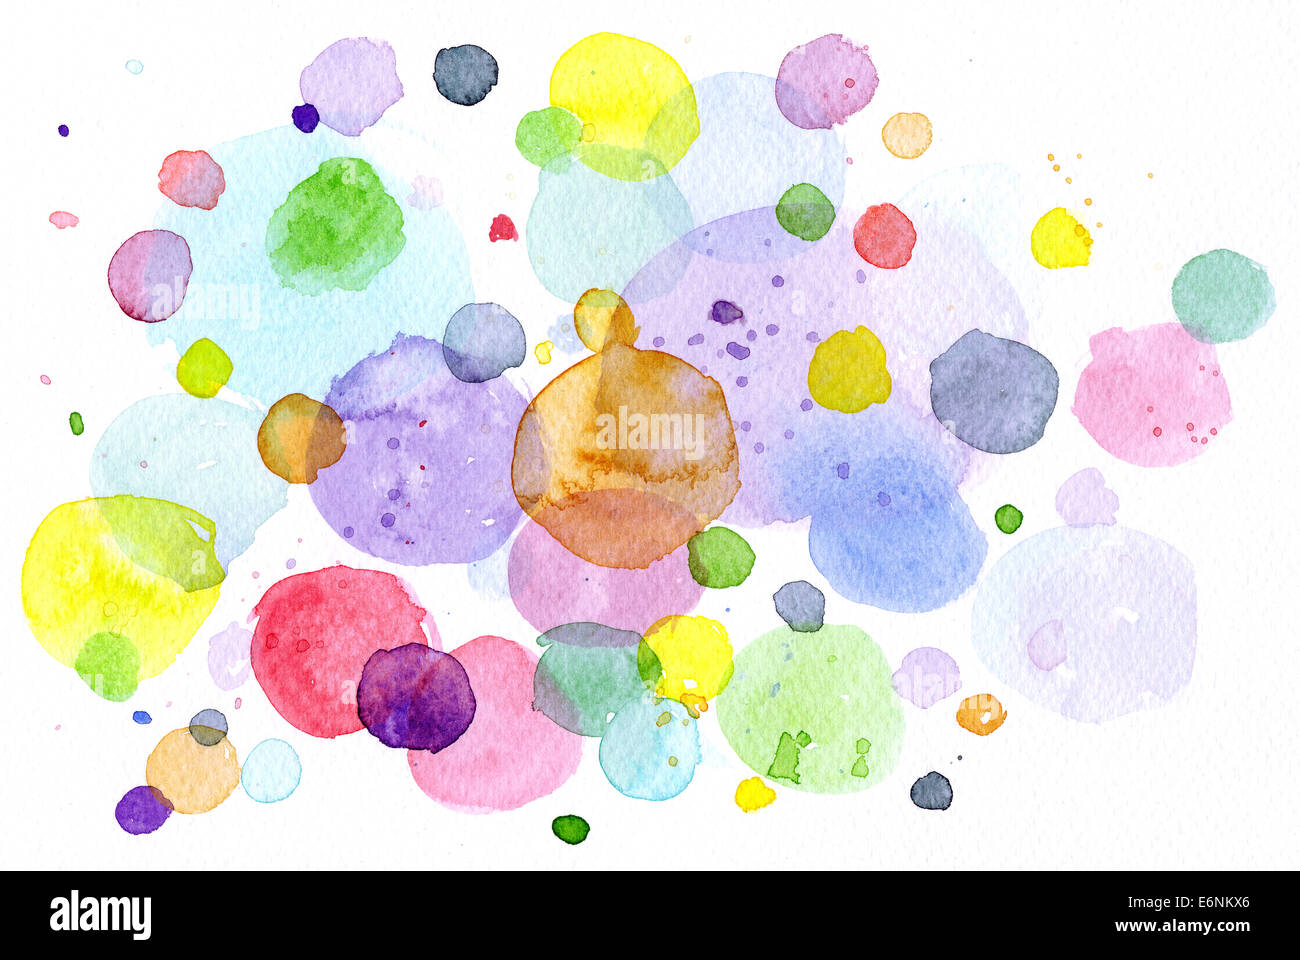 Water Holes Dot Painting stock illustration. Illustration of colorful -  106244177